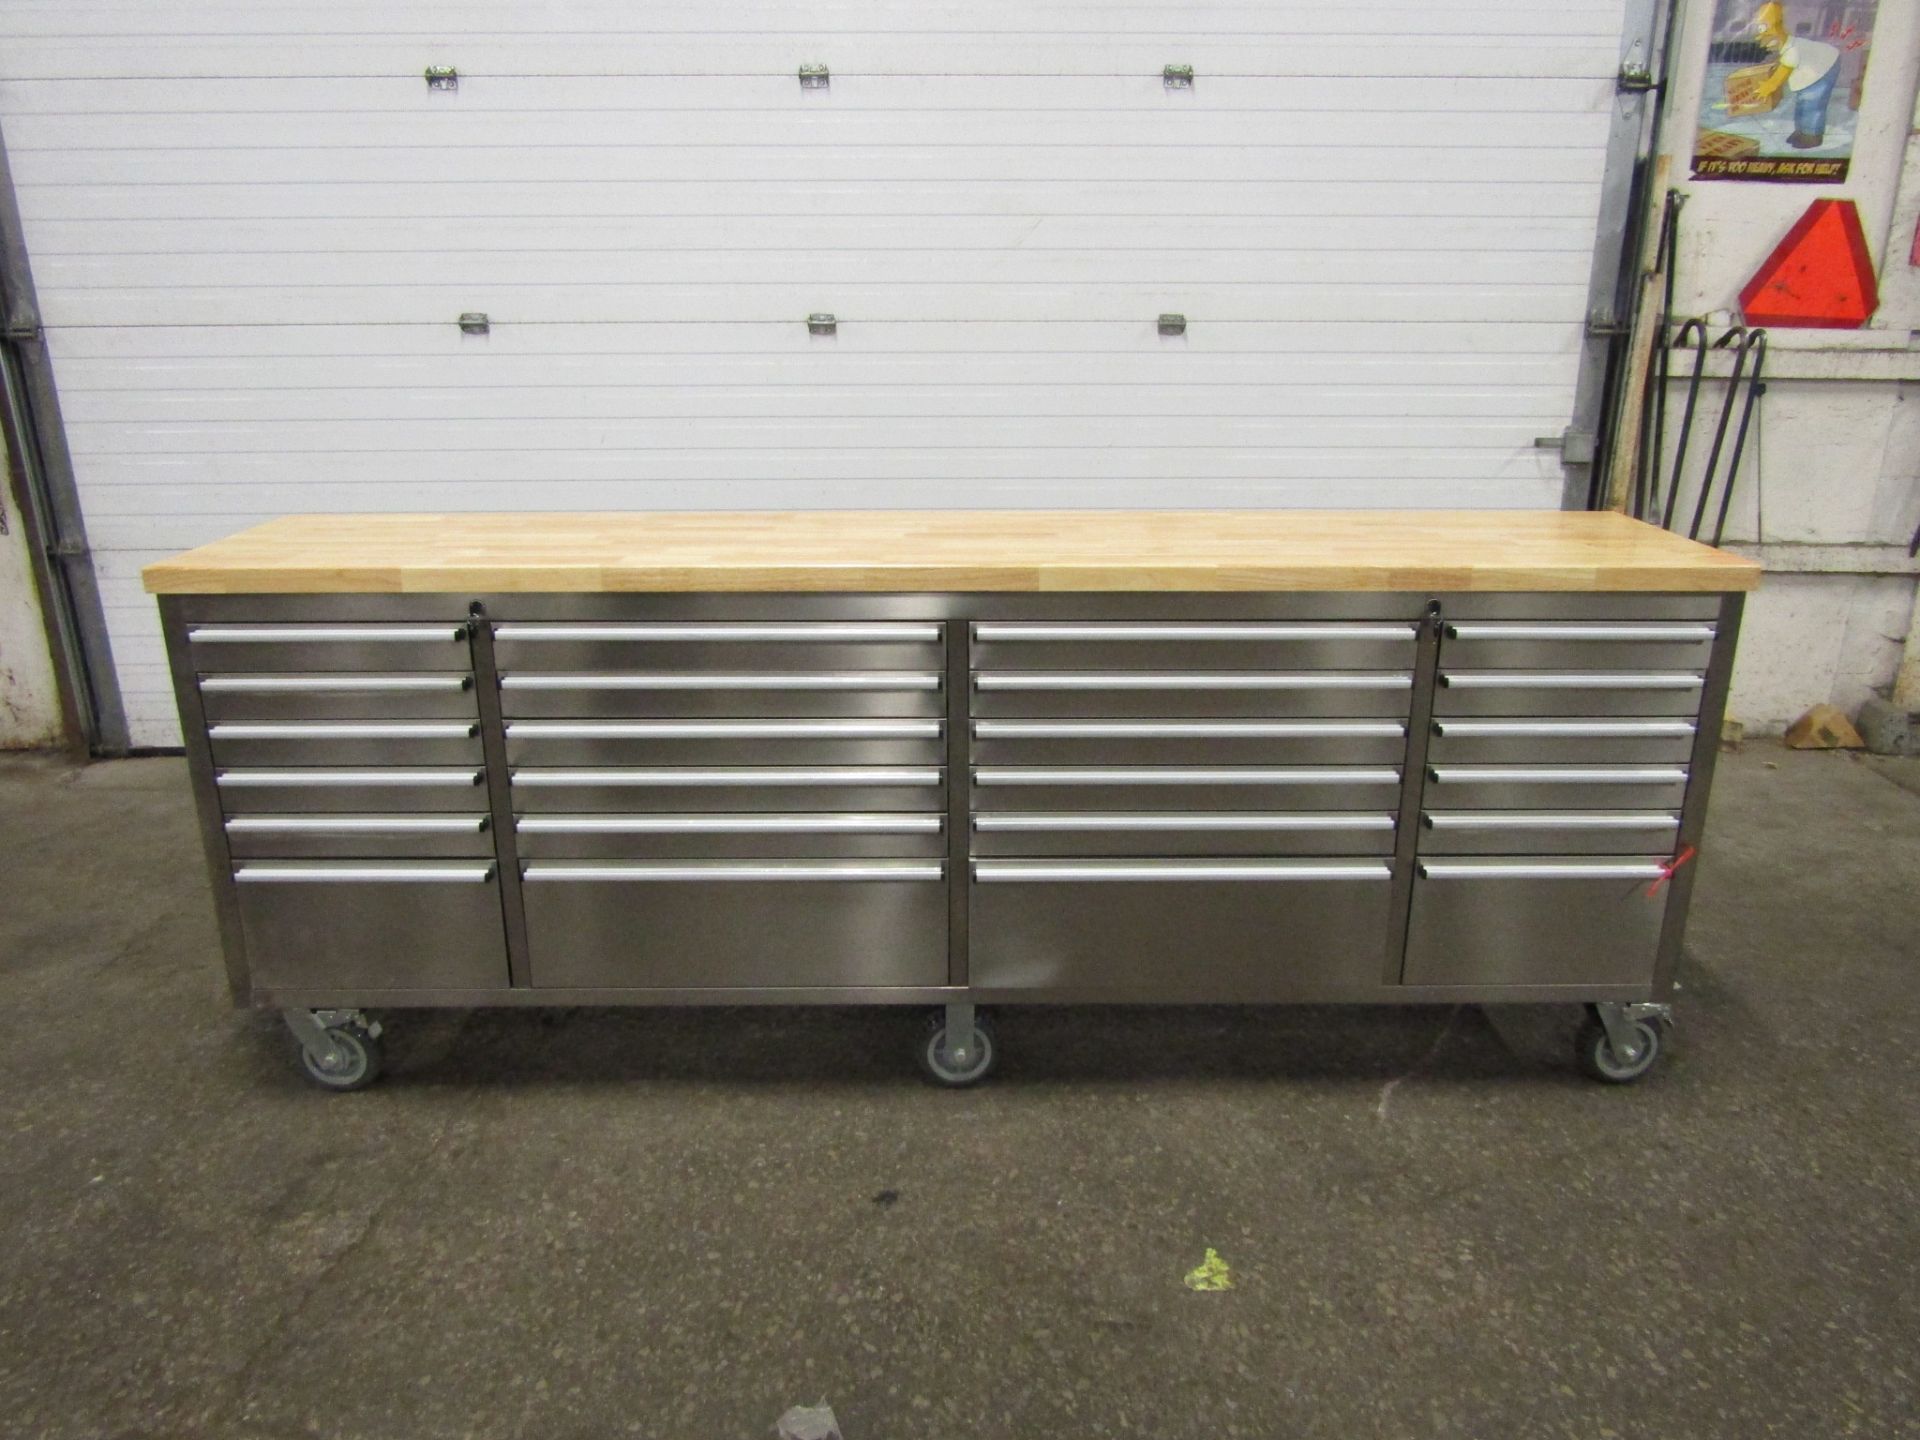 Stainless Steel Cabinet 8' long X 24" deep with 24 drawers and butcher block top NEW MINT UNIT